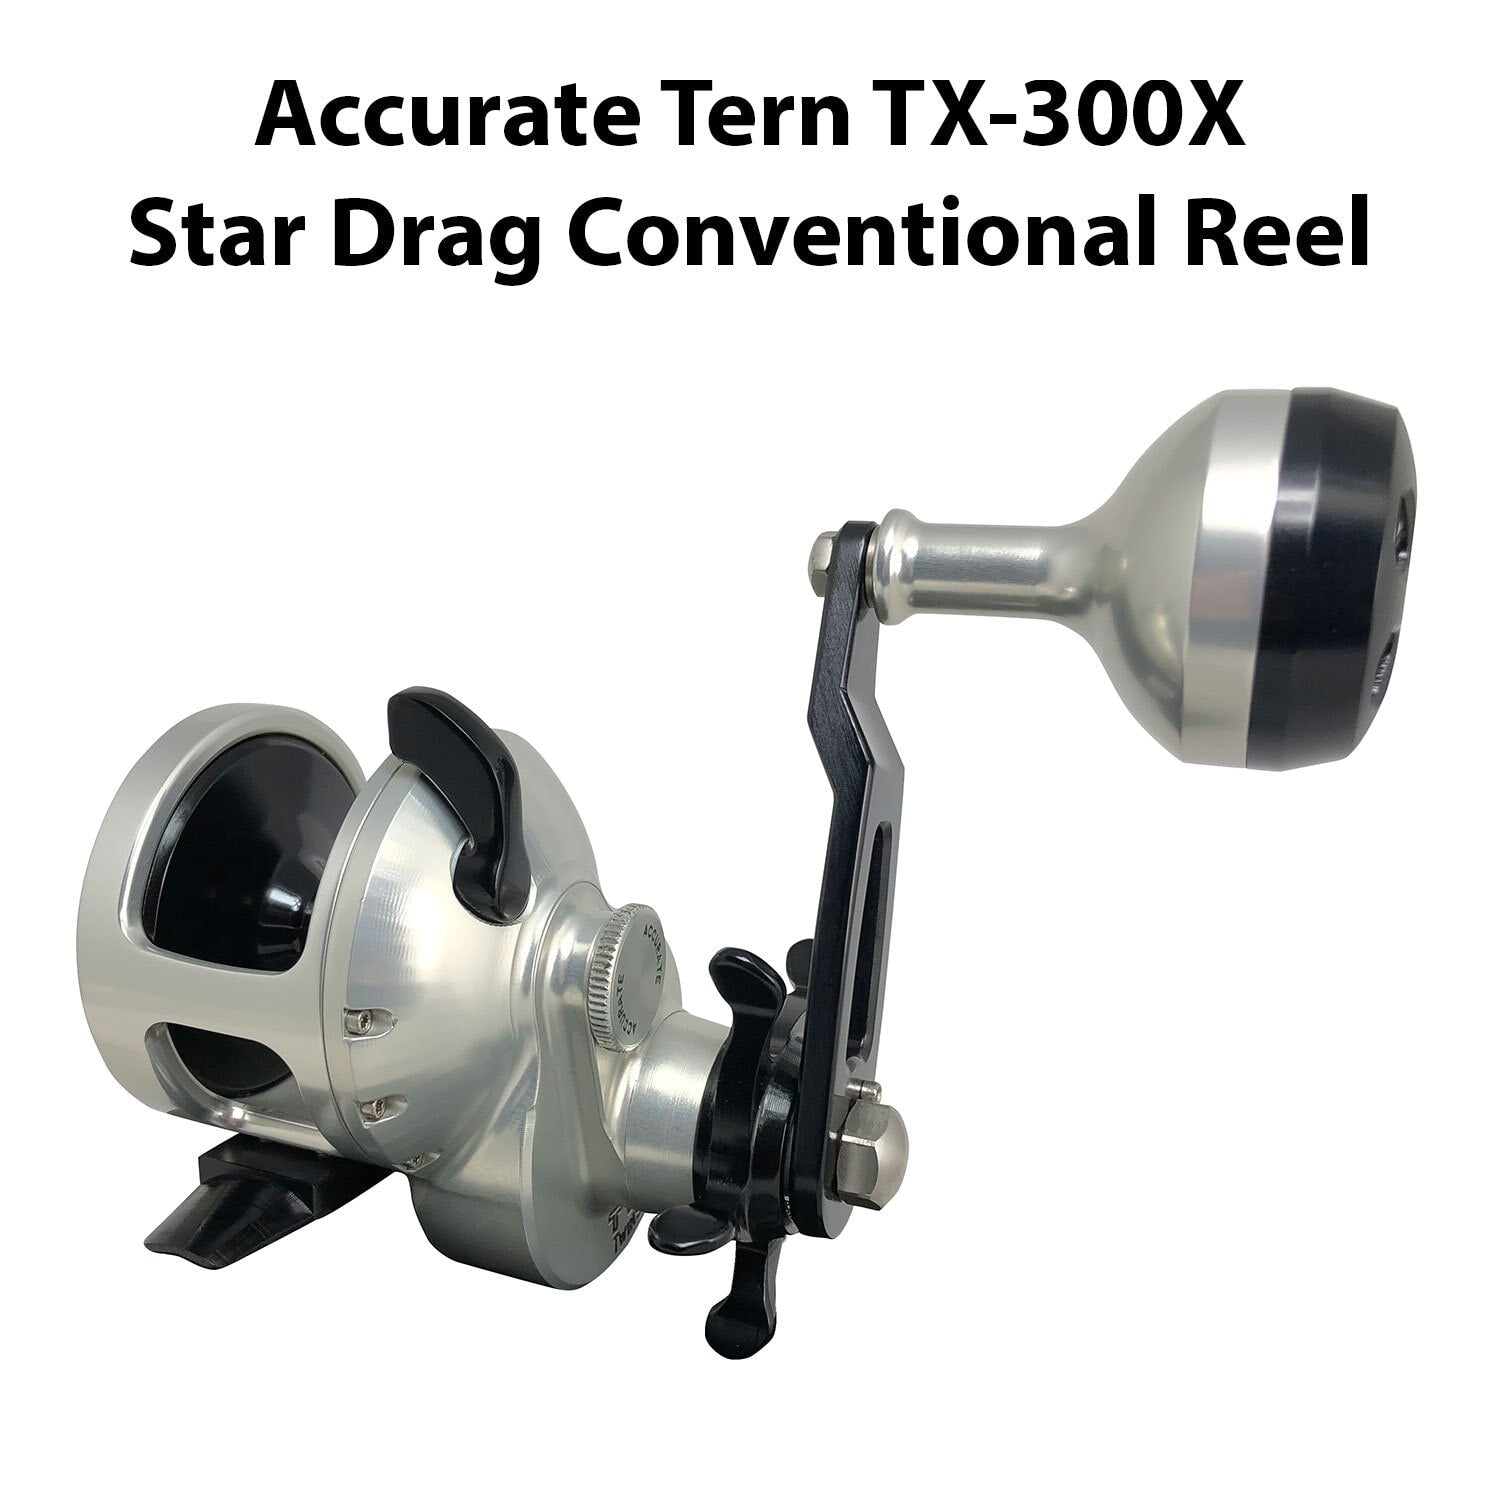 Accurate Tern Star Drag Conventional Reel - TX-300X